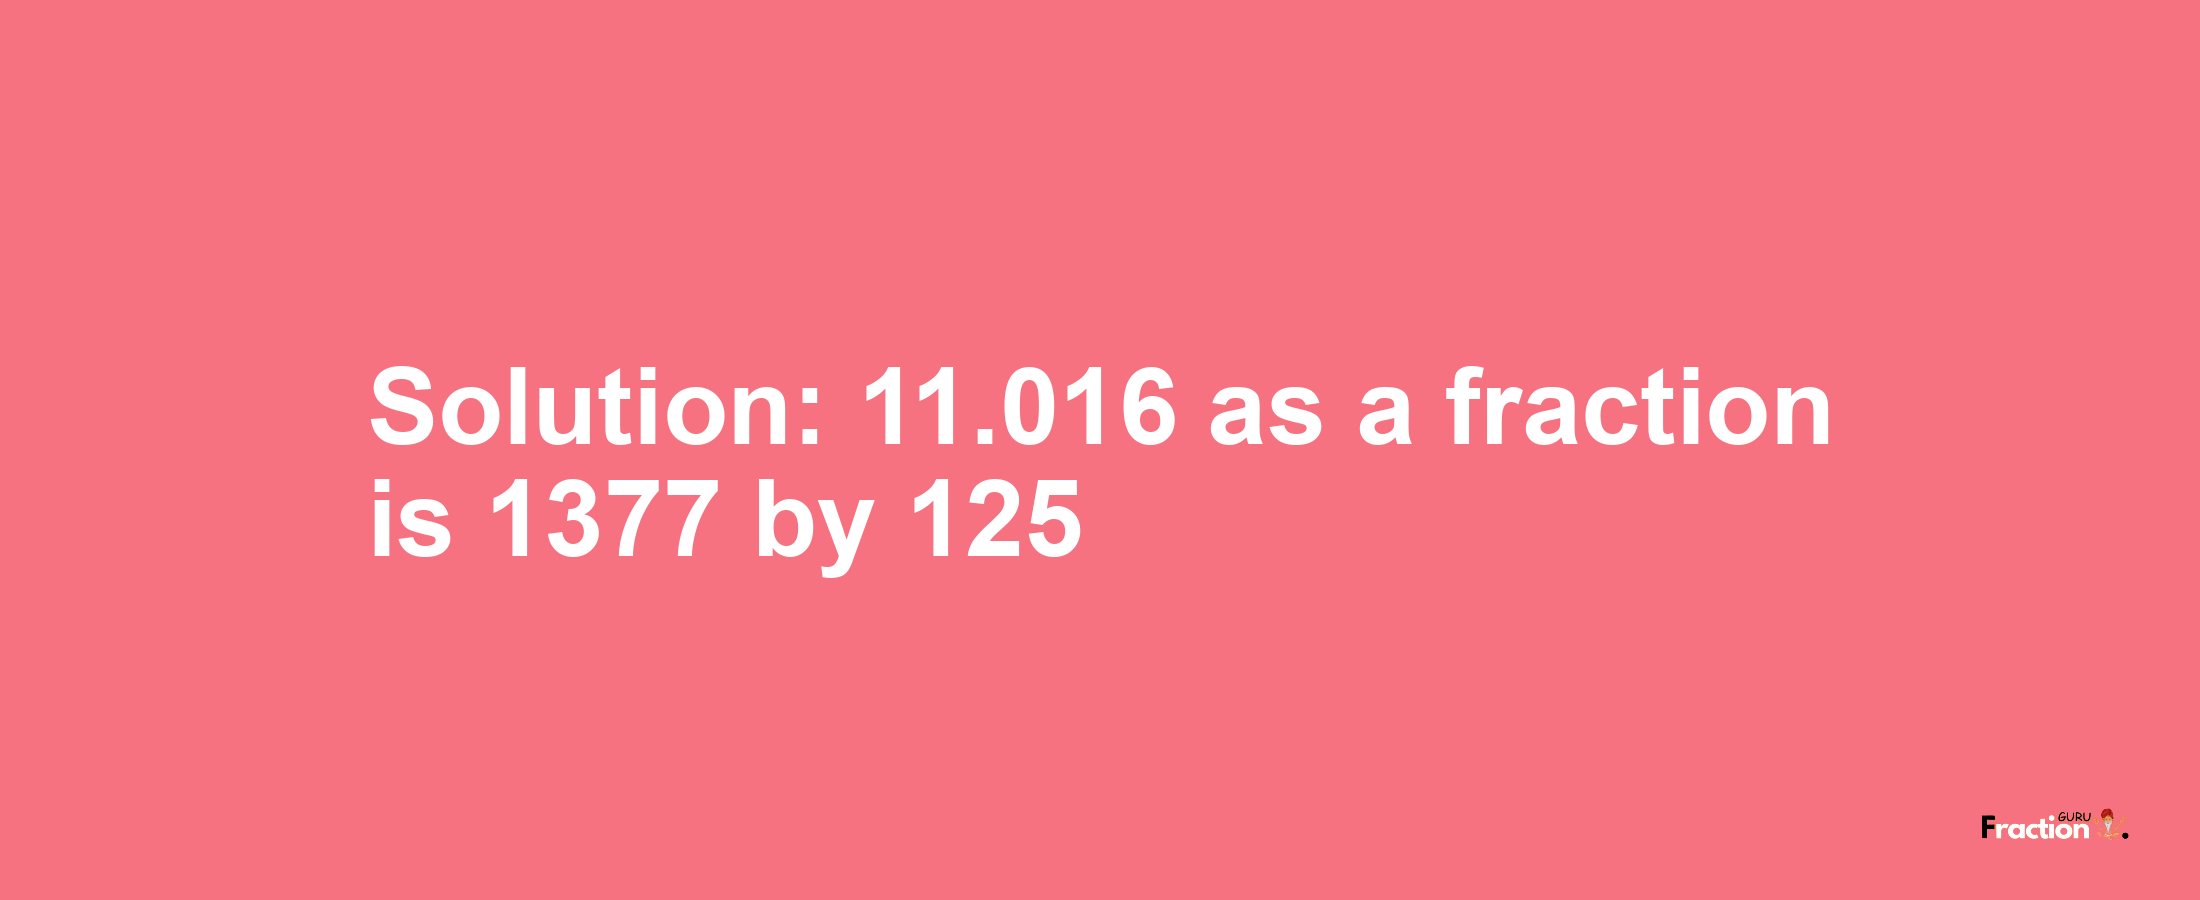 Solution:11.016 as a fraction is 1377/125